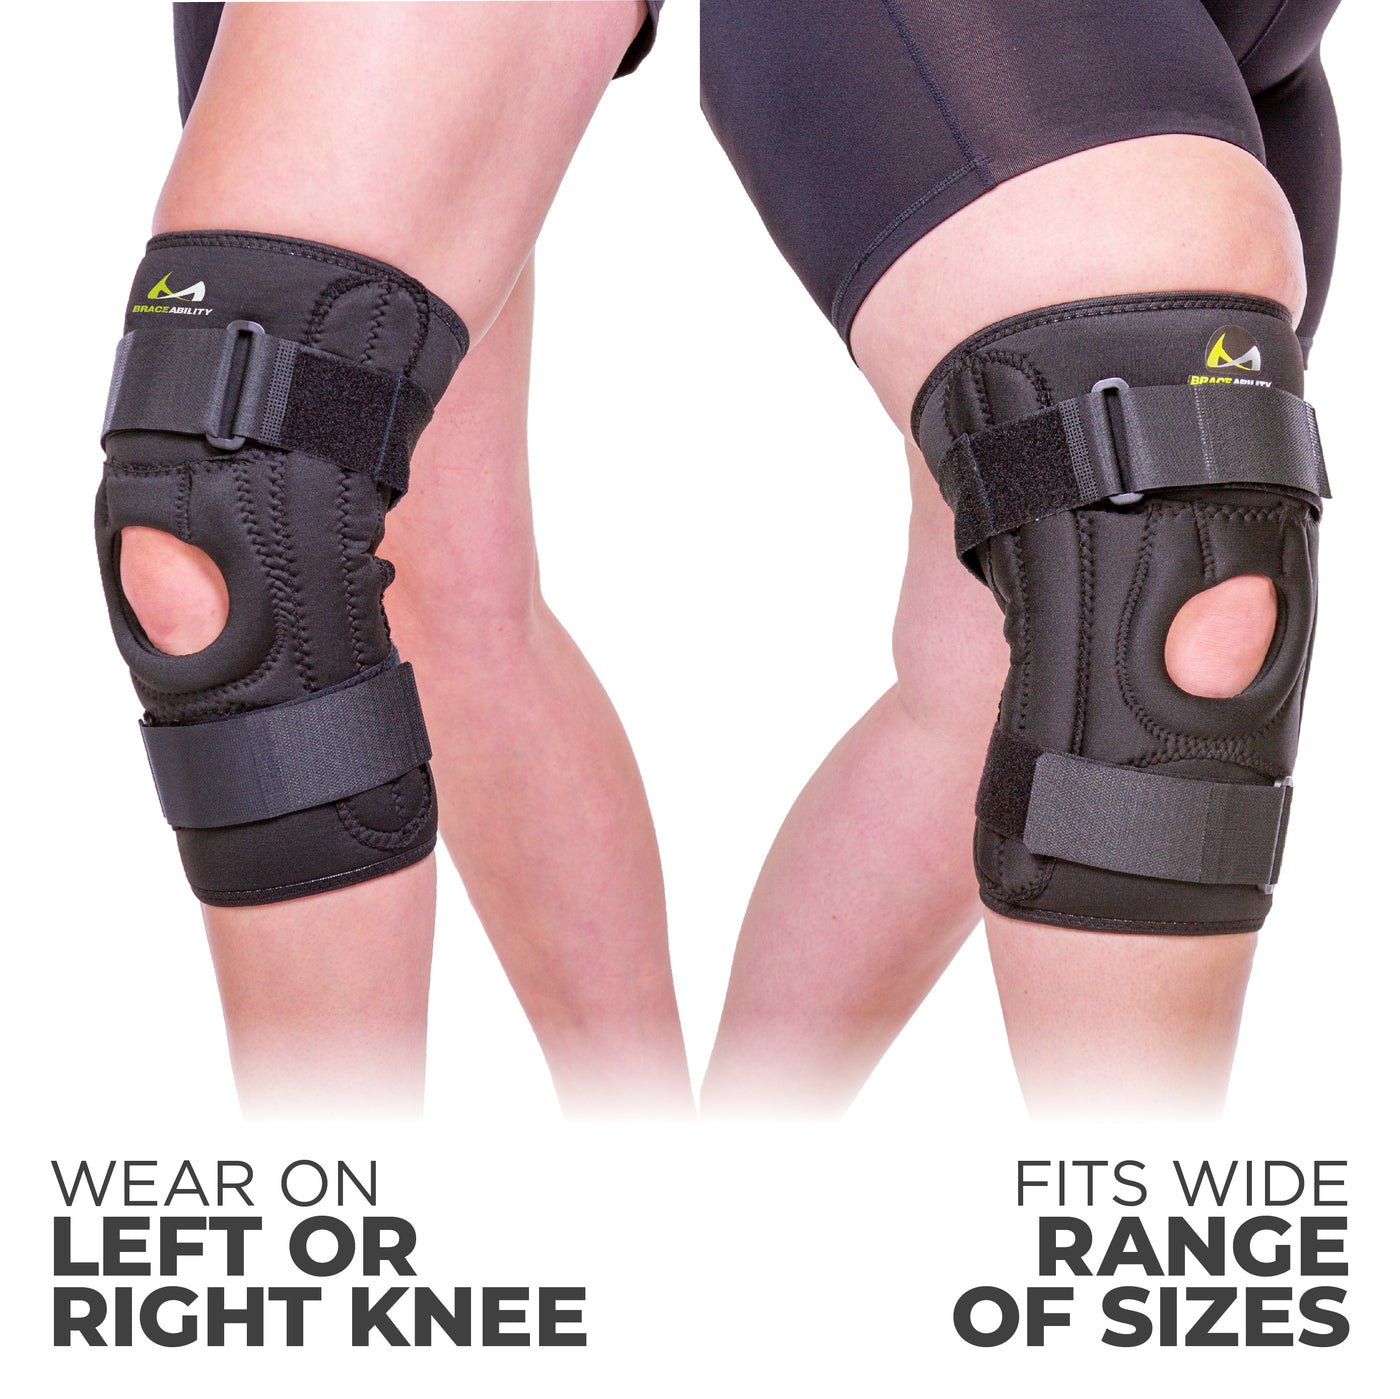 The extra large u-shaped support can be worn on left or right knee and fits a wide range of sizes